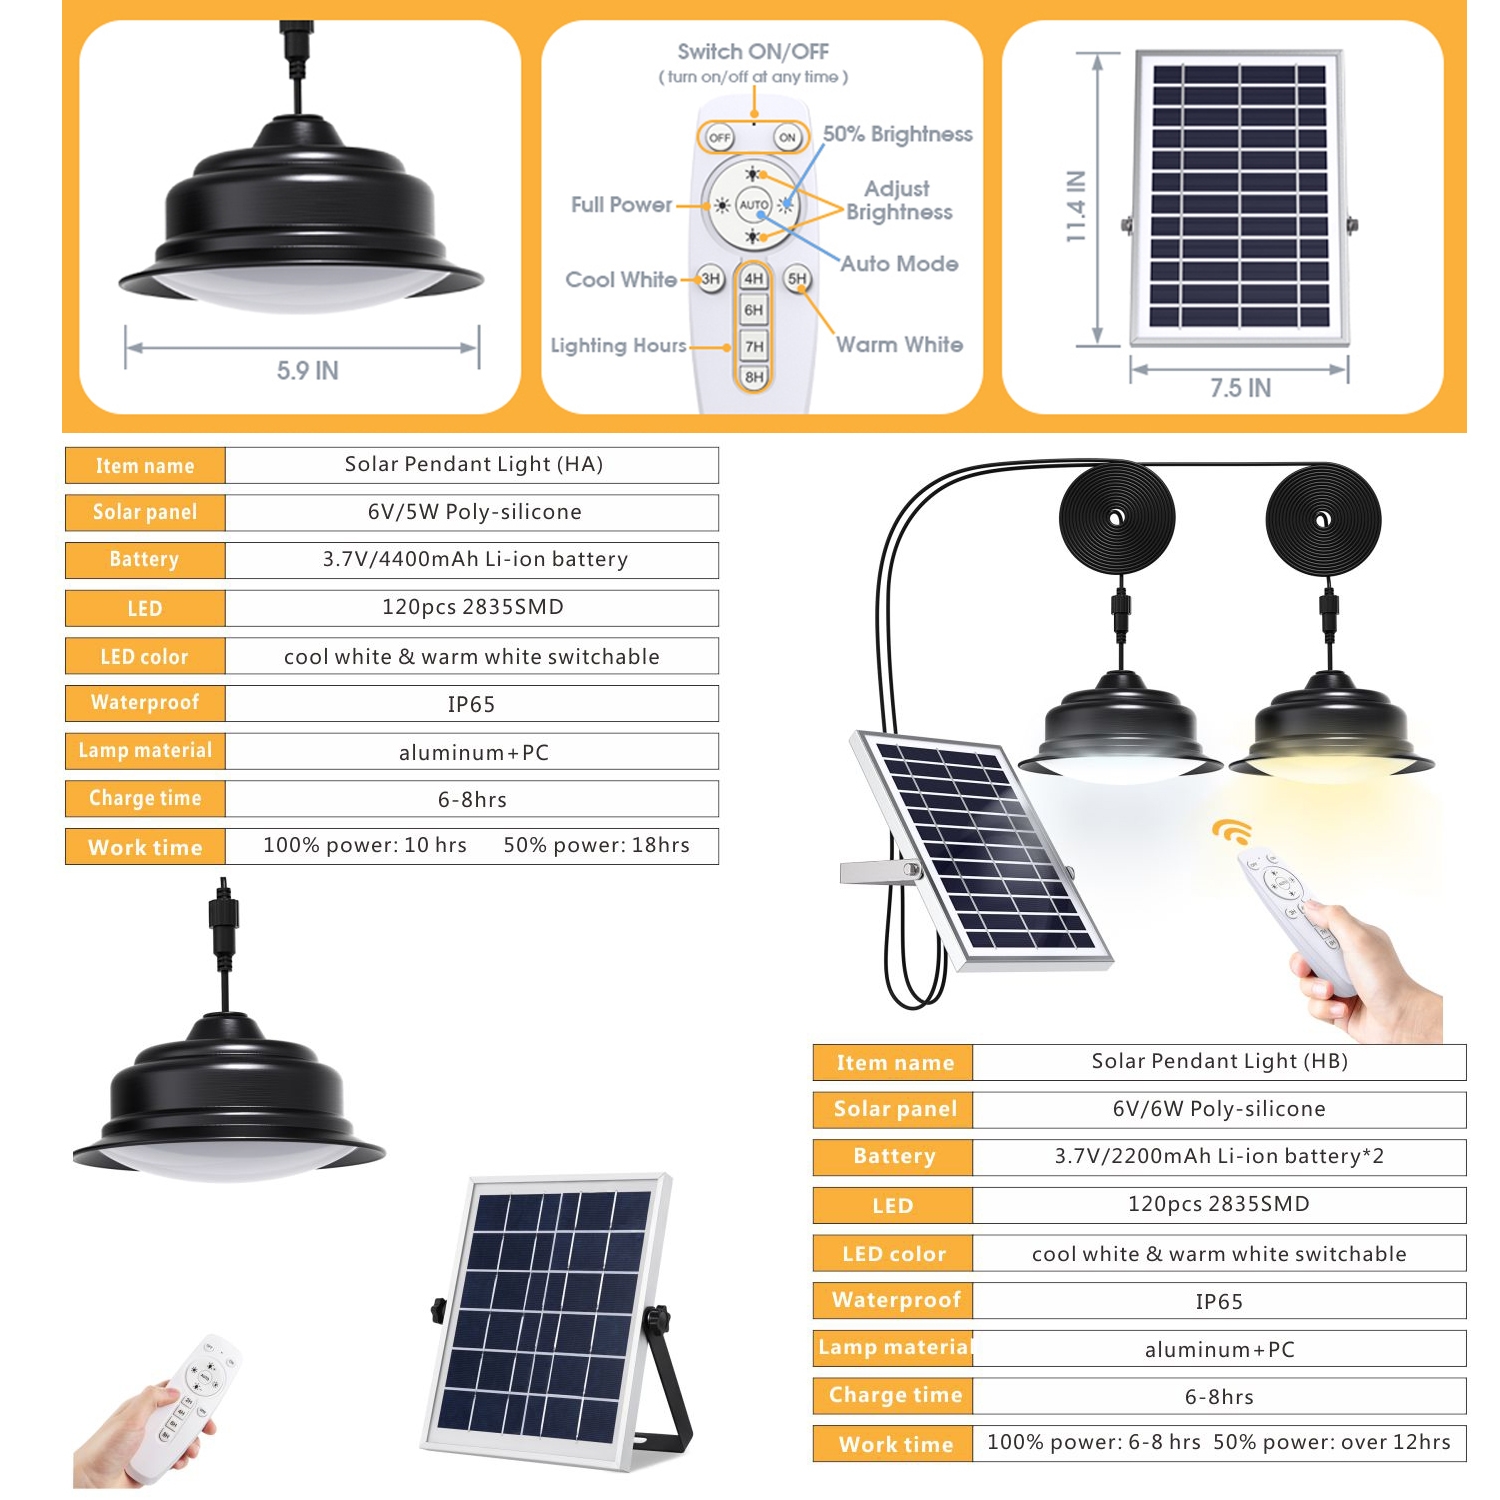 24+ Types of Modern Solar Lights: Uses, Benefits and Guide